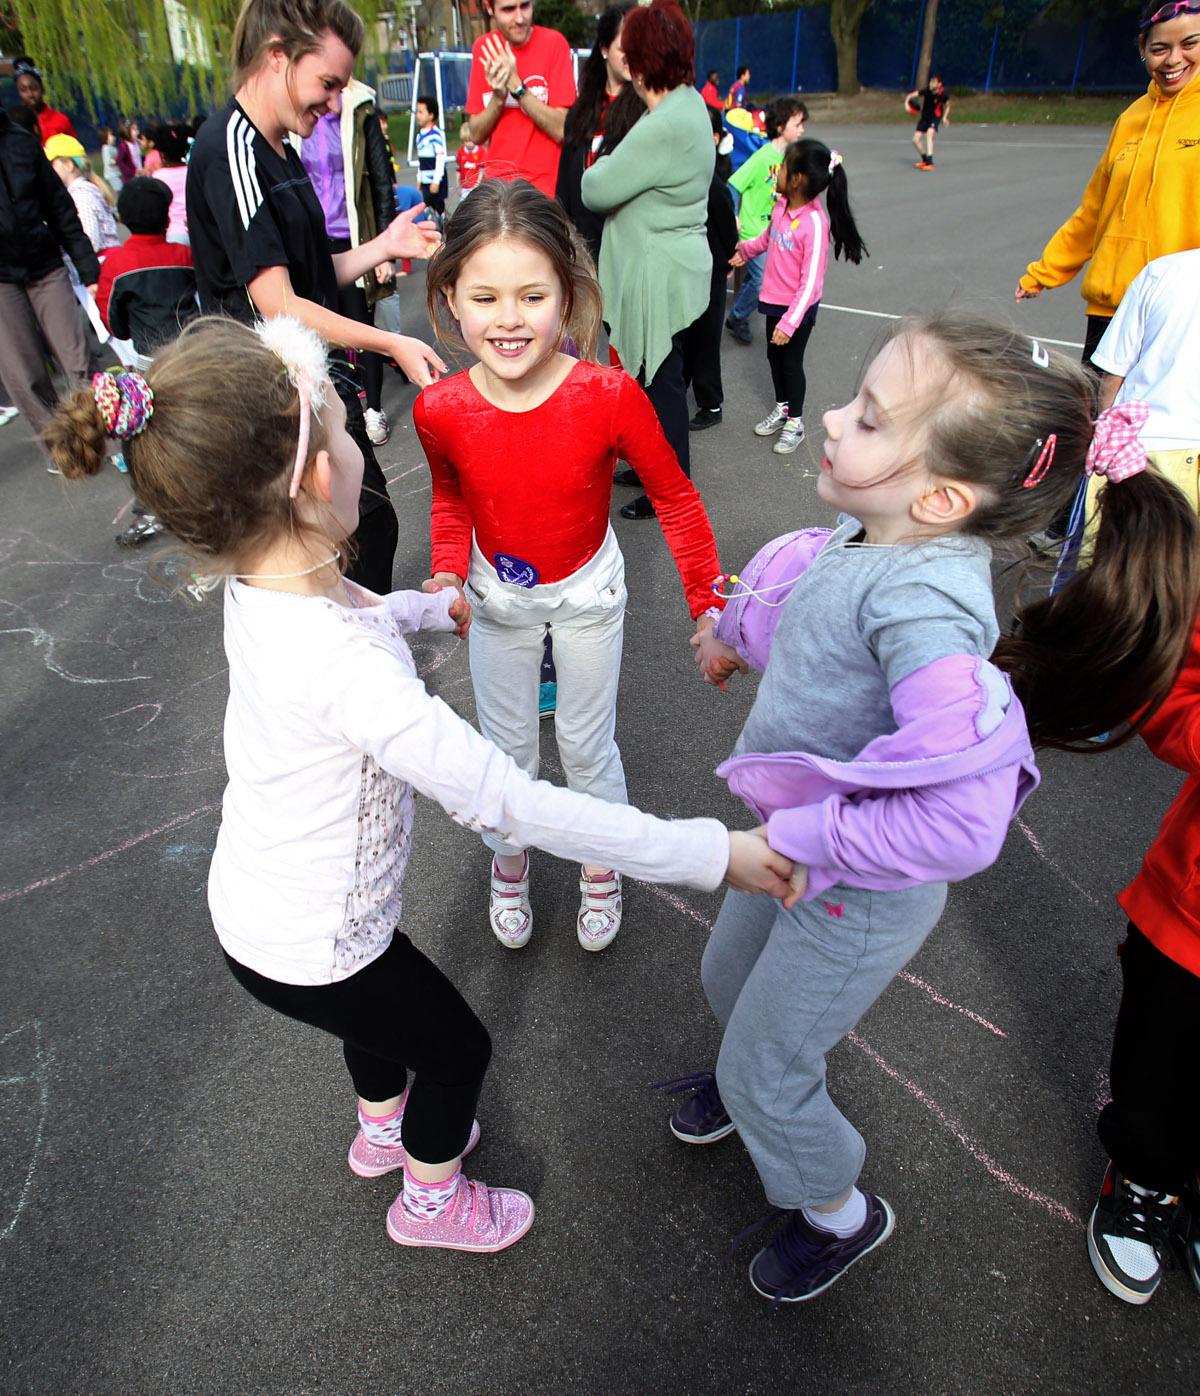 Children take part in a school dance-off for sports relief at St Mary's C of E Primary School, Brooke Road, Walthamstow. (21/3/2014) EL75987_6